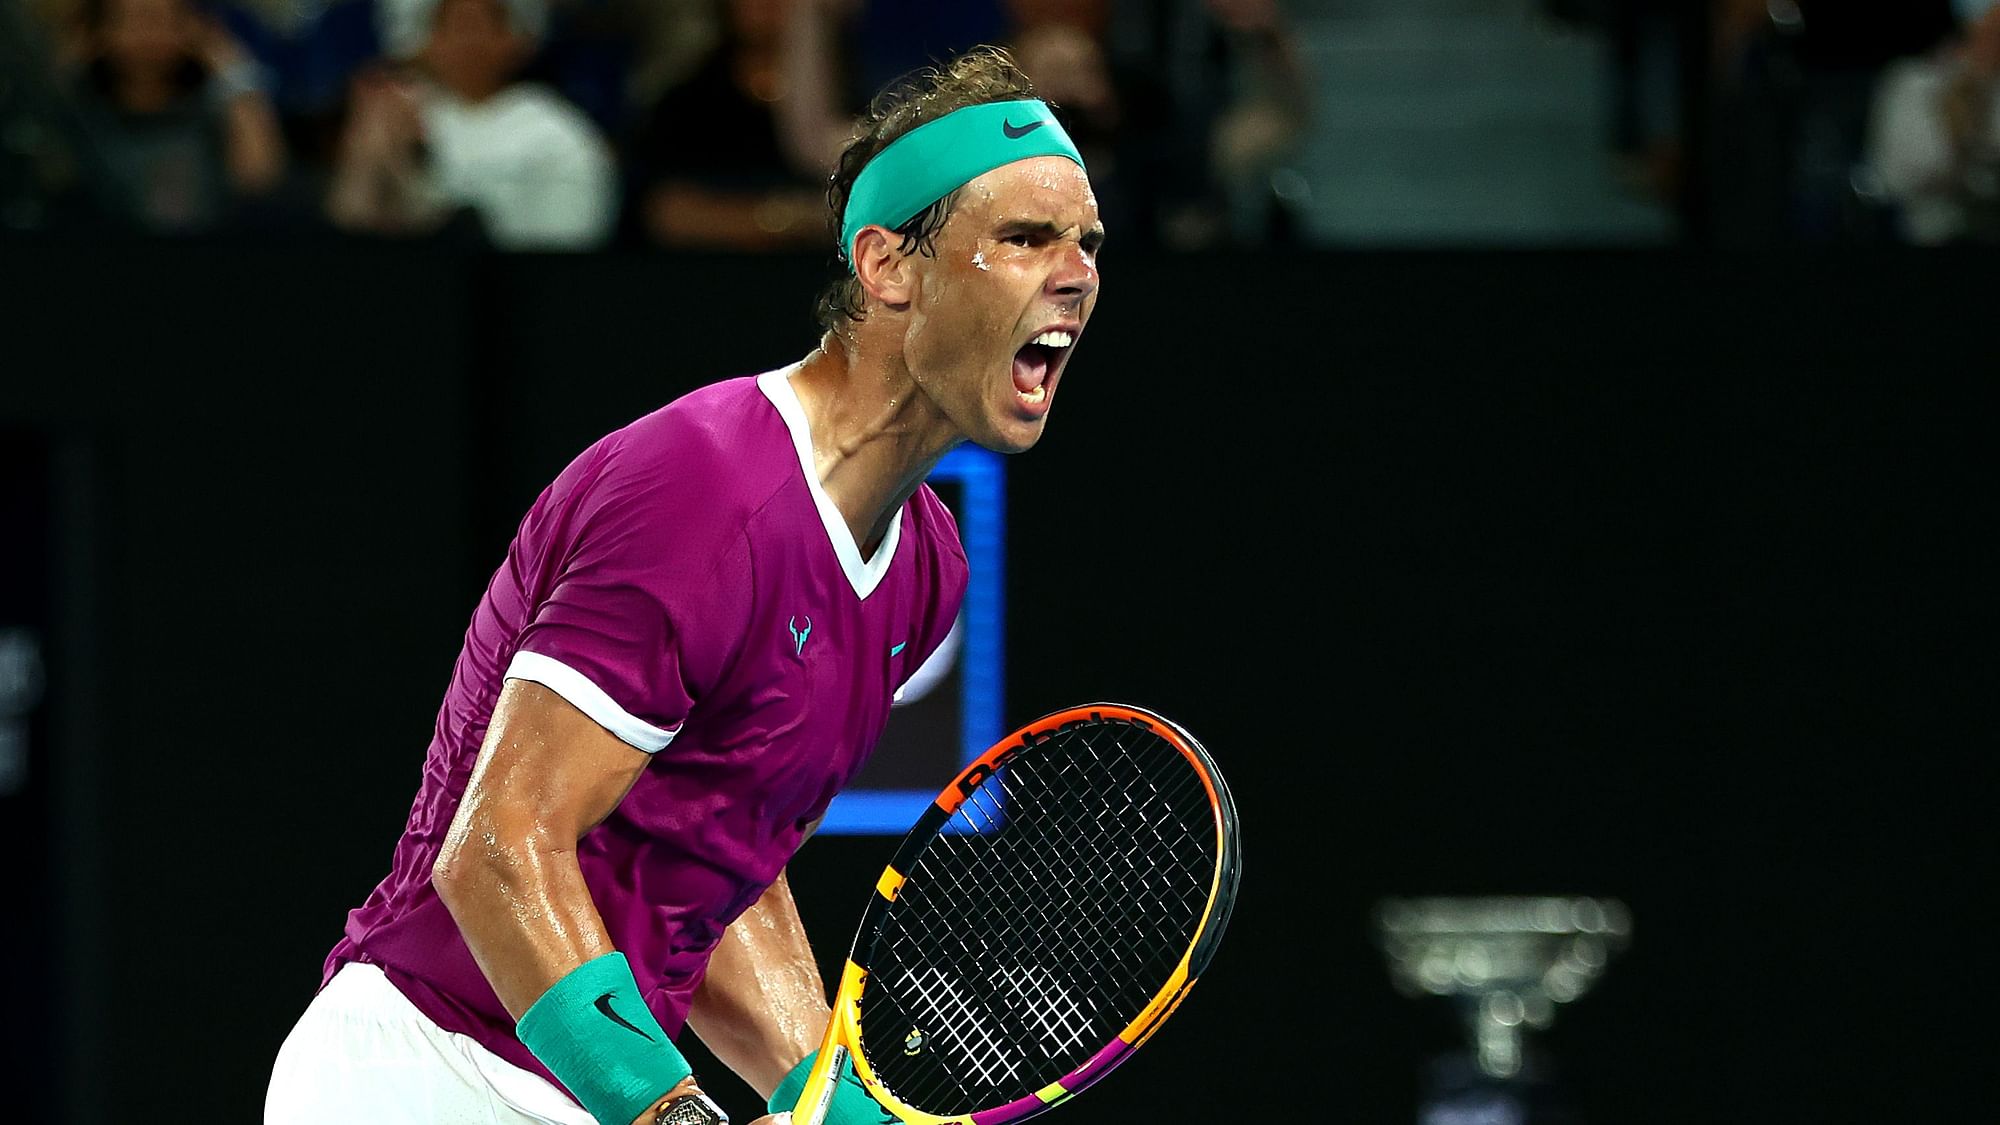 Nadal Stages The Ultimate Comeback to Beat Medvedev and Win 2022 Australian Open